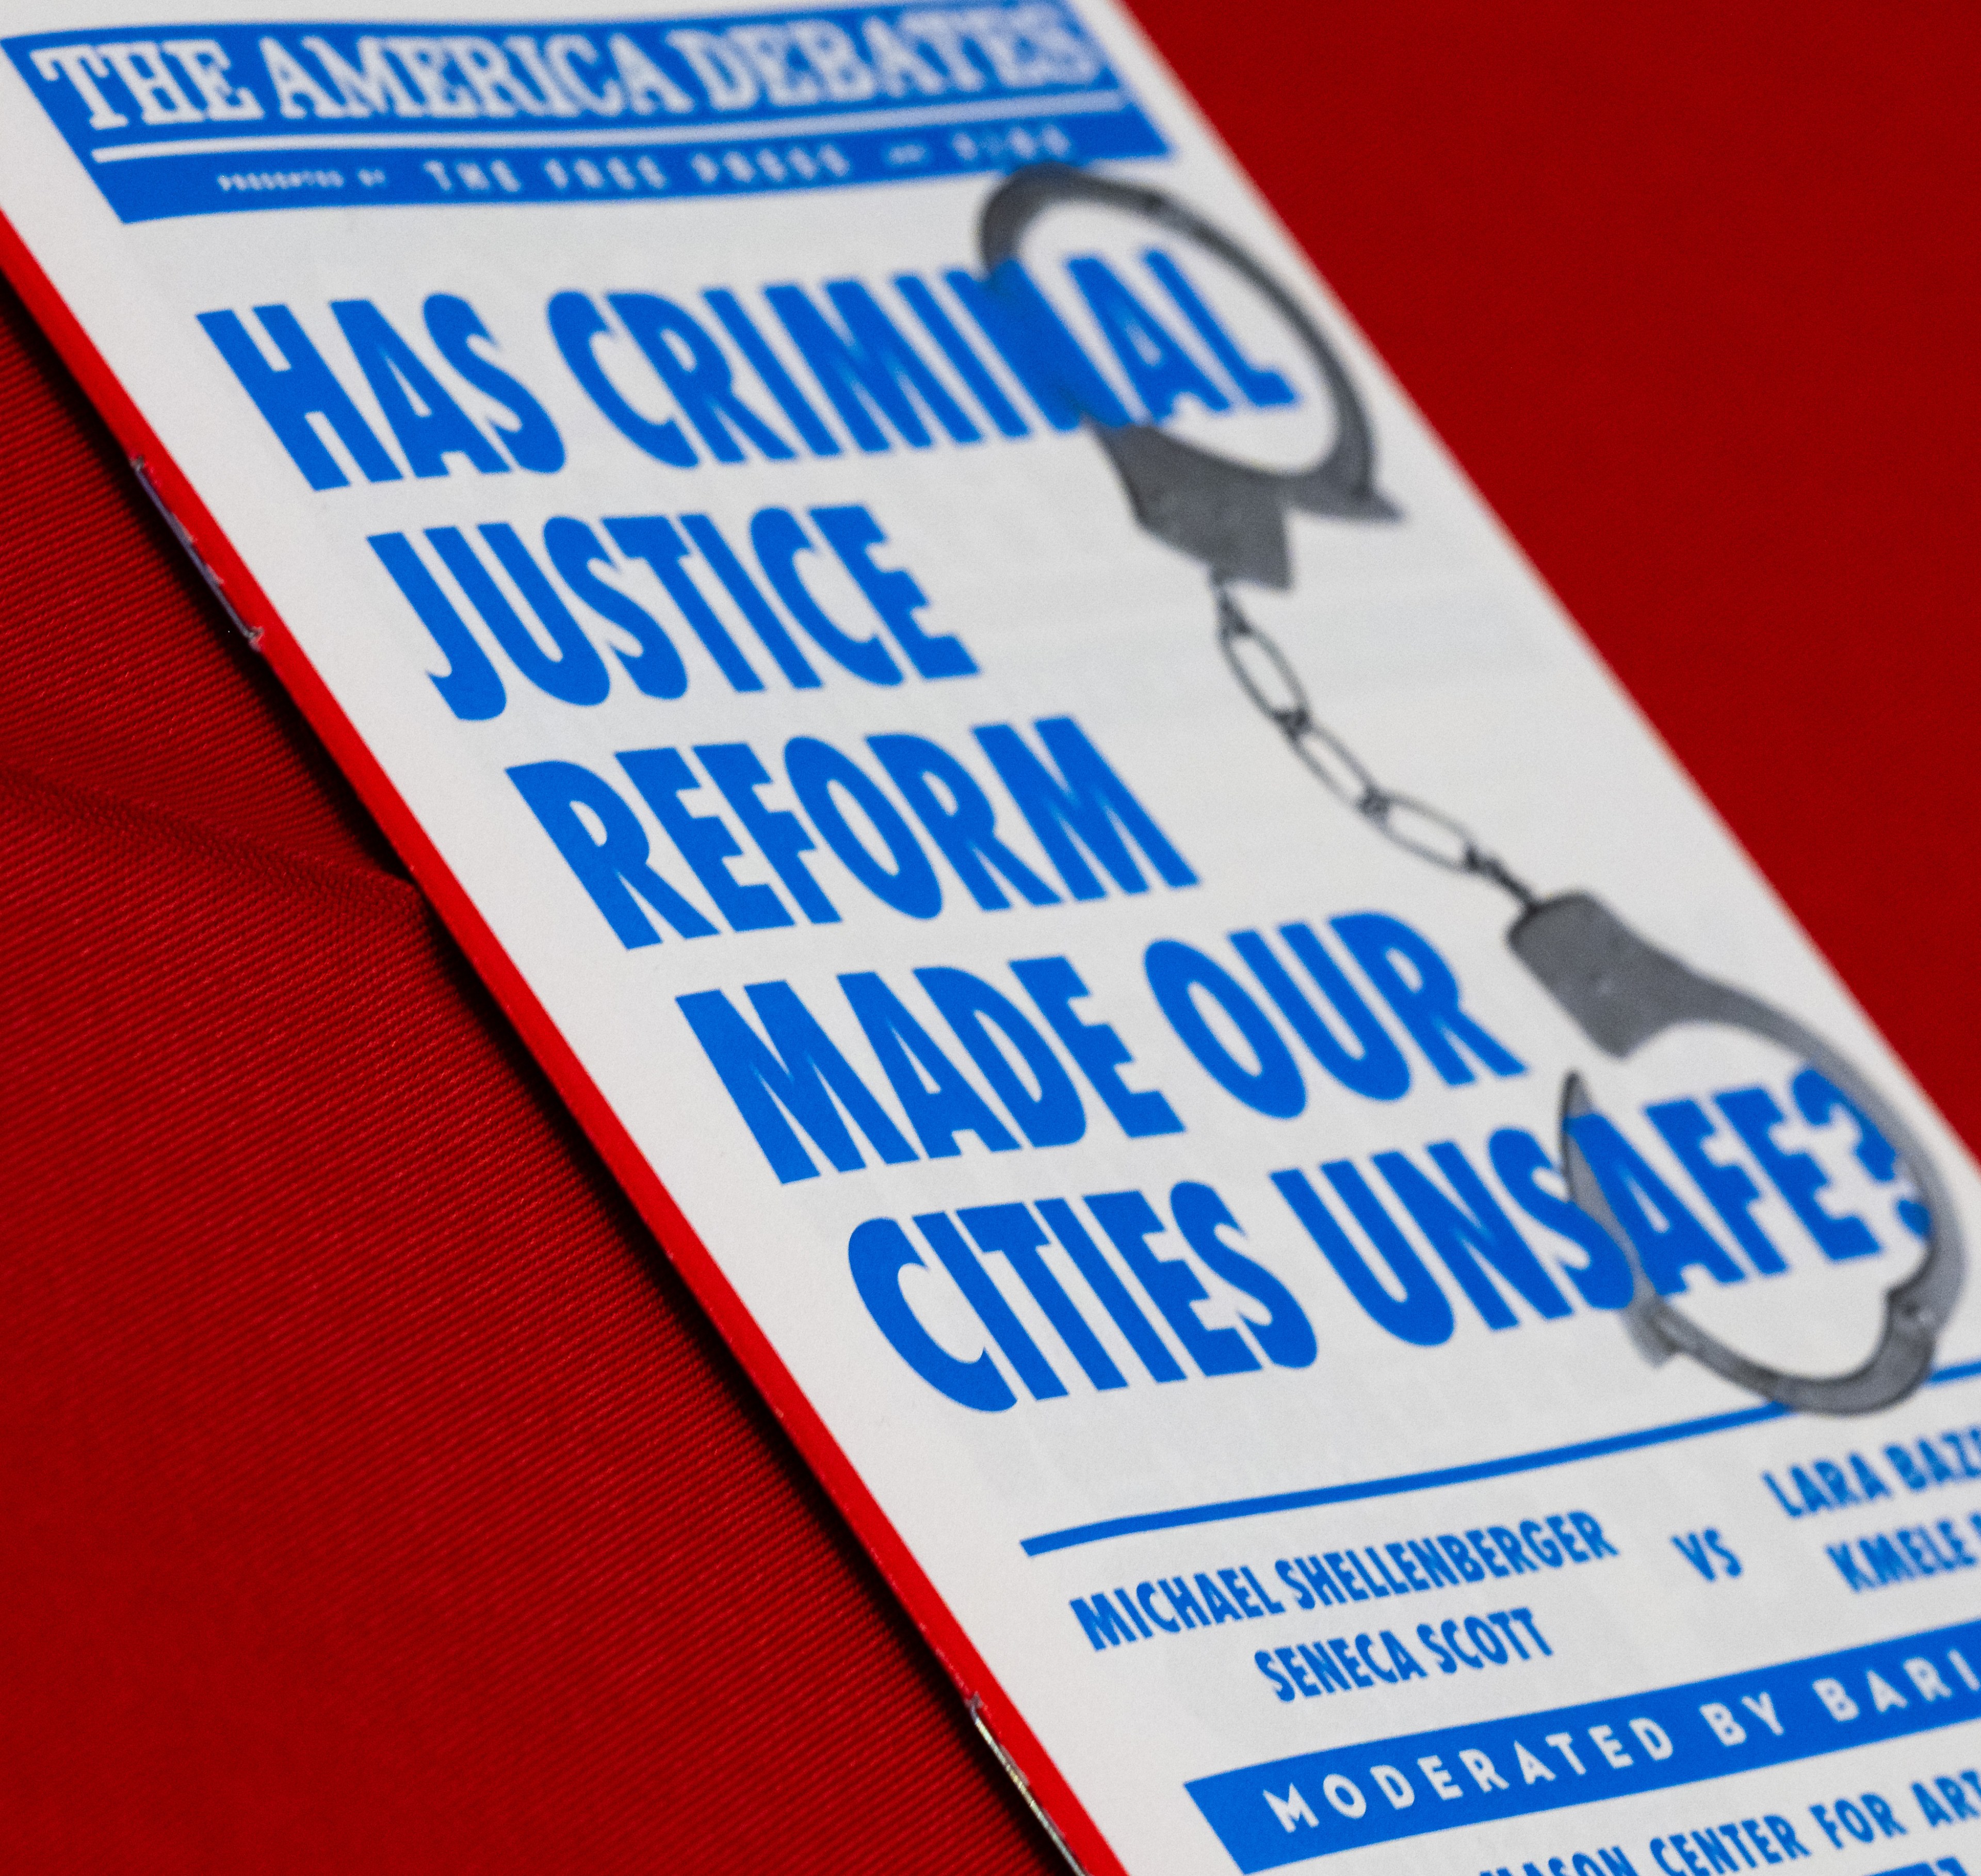 The image shows a debate flyer with blue text on a white background asking, &quot;Has criminal justice reform made our cities unsafe?&quot; with an image of handcuffs.